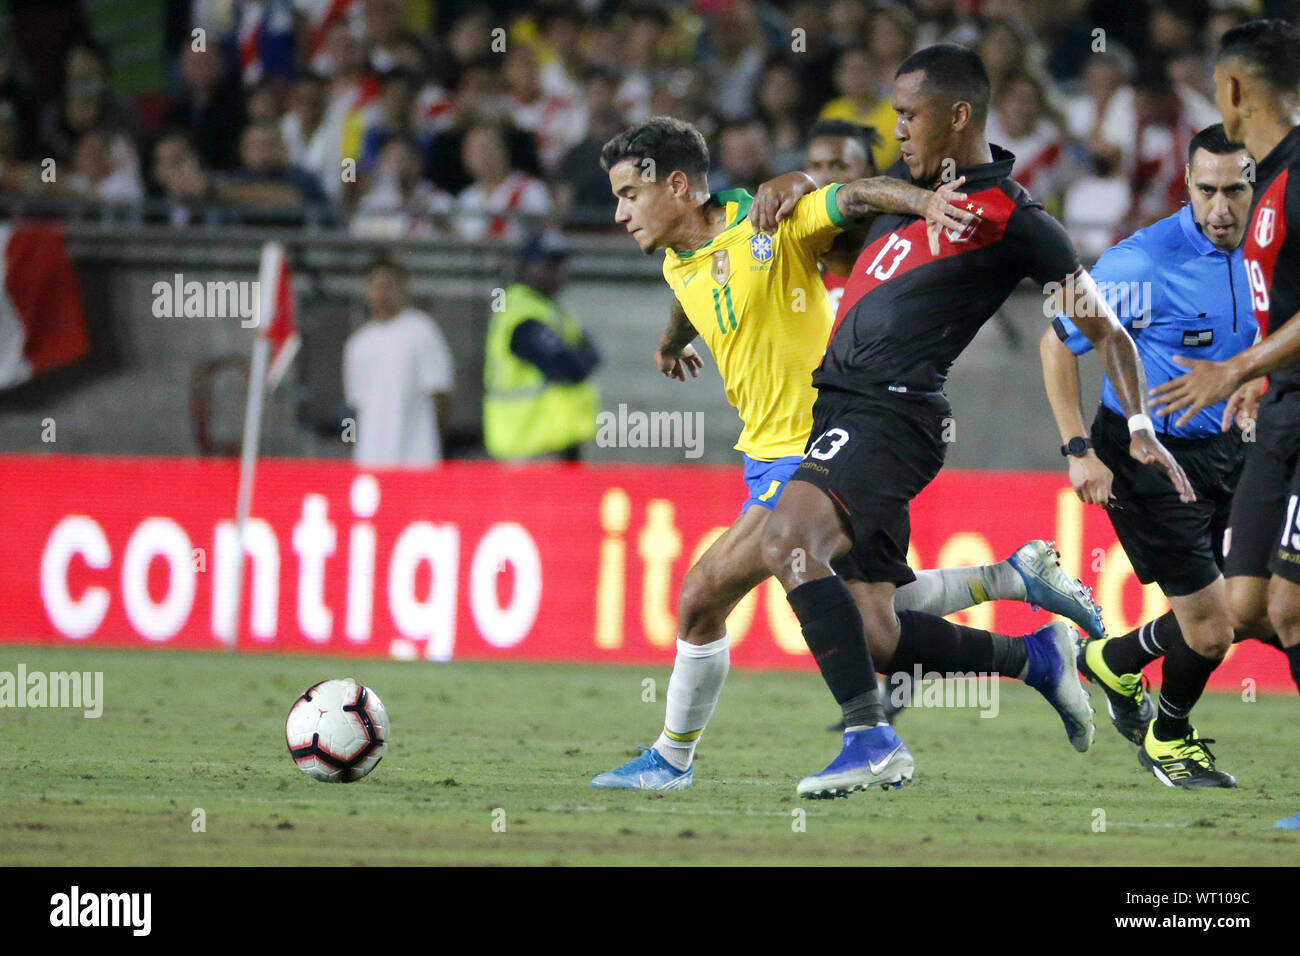 Los Angeles, California, USA. 10th Sep, 2019. Brazil midfielder Philippe Coutinho (11) and Peru midfielder Renato Tapia (13) vie for the ball during an International Friendly Soccer match between Brazil and Peru at the Los Angeles Memorial Coliseum in Los Angeles on Tuesday, September 10, 2019. Credit: Ringo Chiu/ZUMA Wire/Alamy Live News Stock Photo